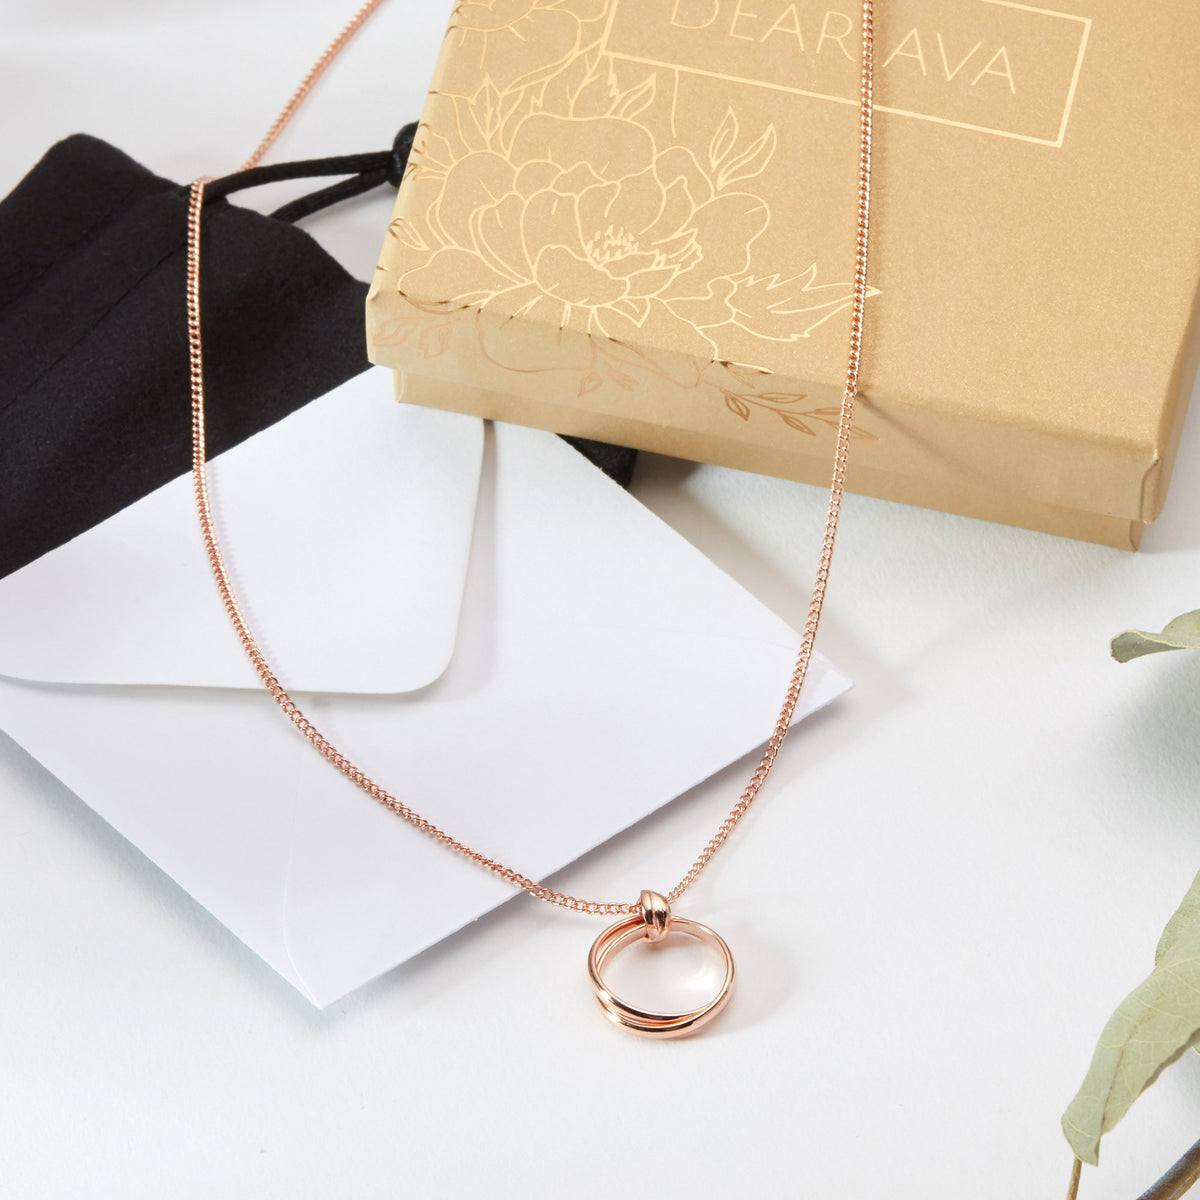 Birthday Gifts for Teen Girls: Birthday Present for Teenager, Necklace,  Preteen, Teen, Jewelry, Bday Gift, Gift Idea, Daughter, Niece, Compass -  Dear Ava